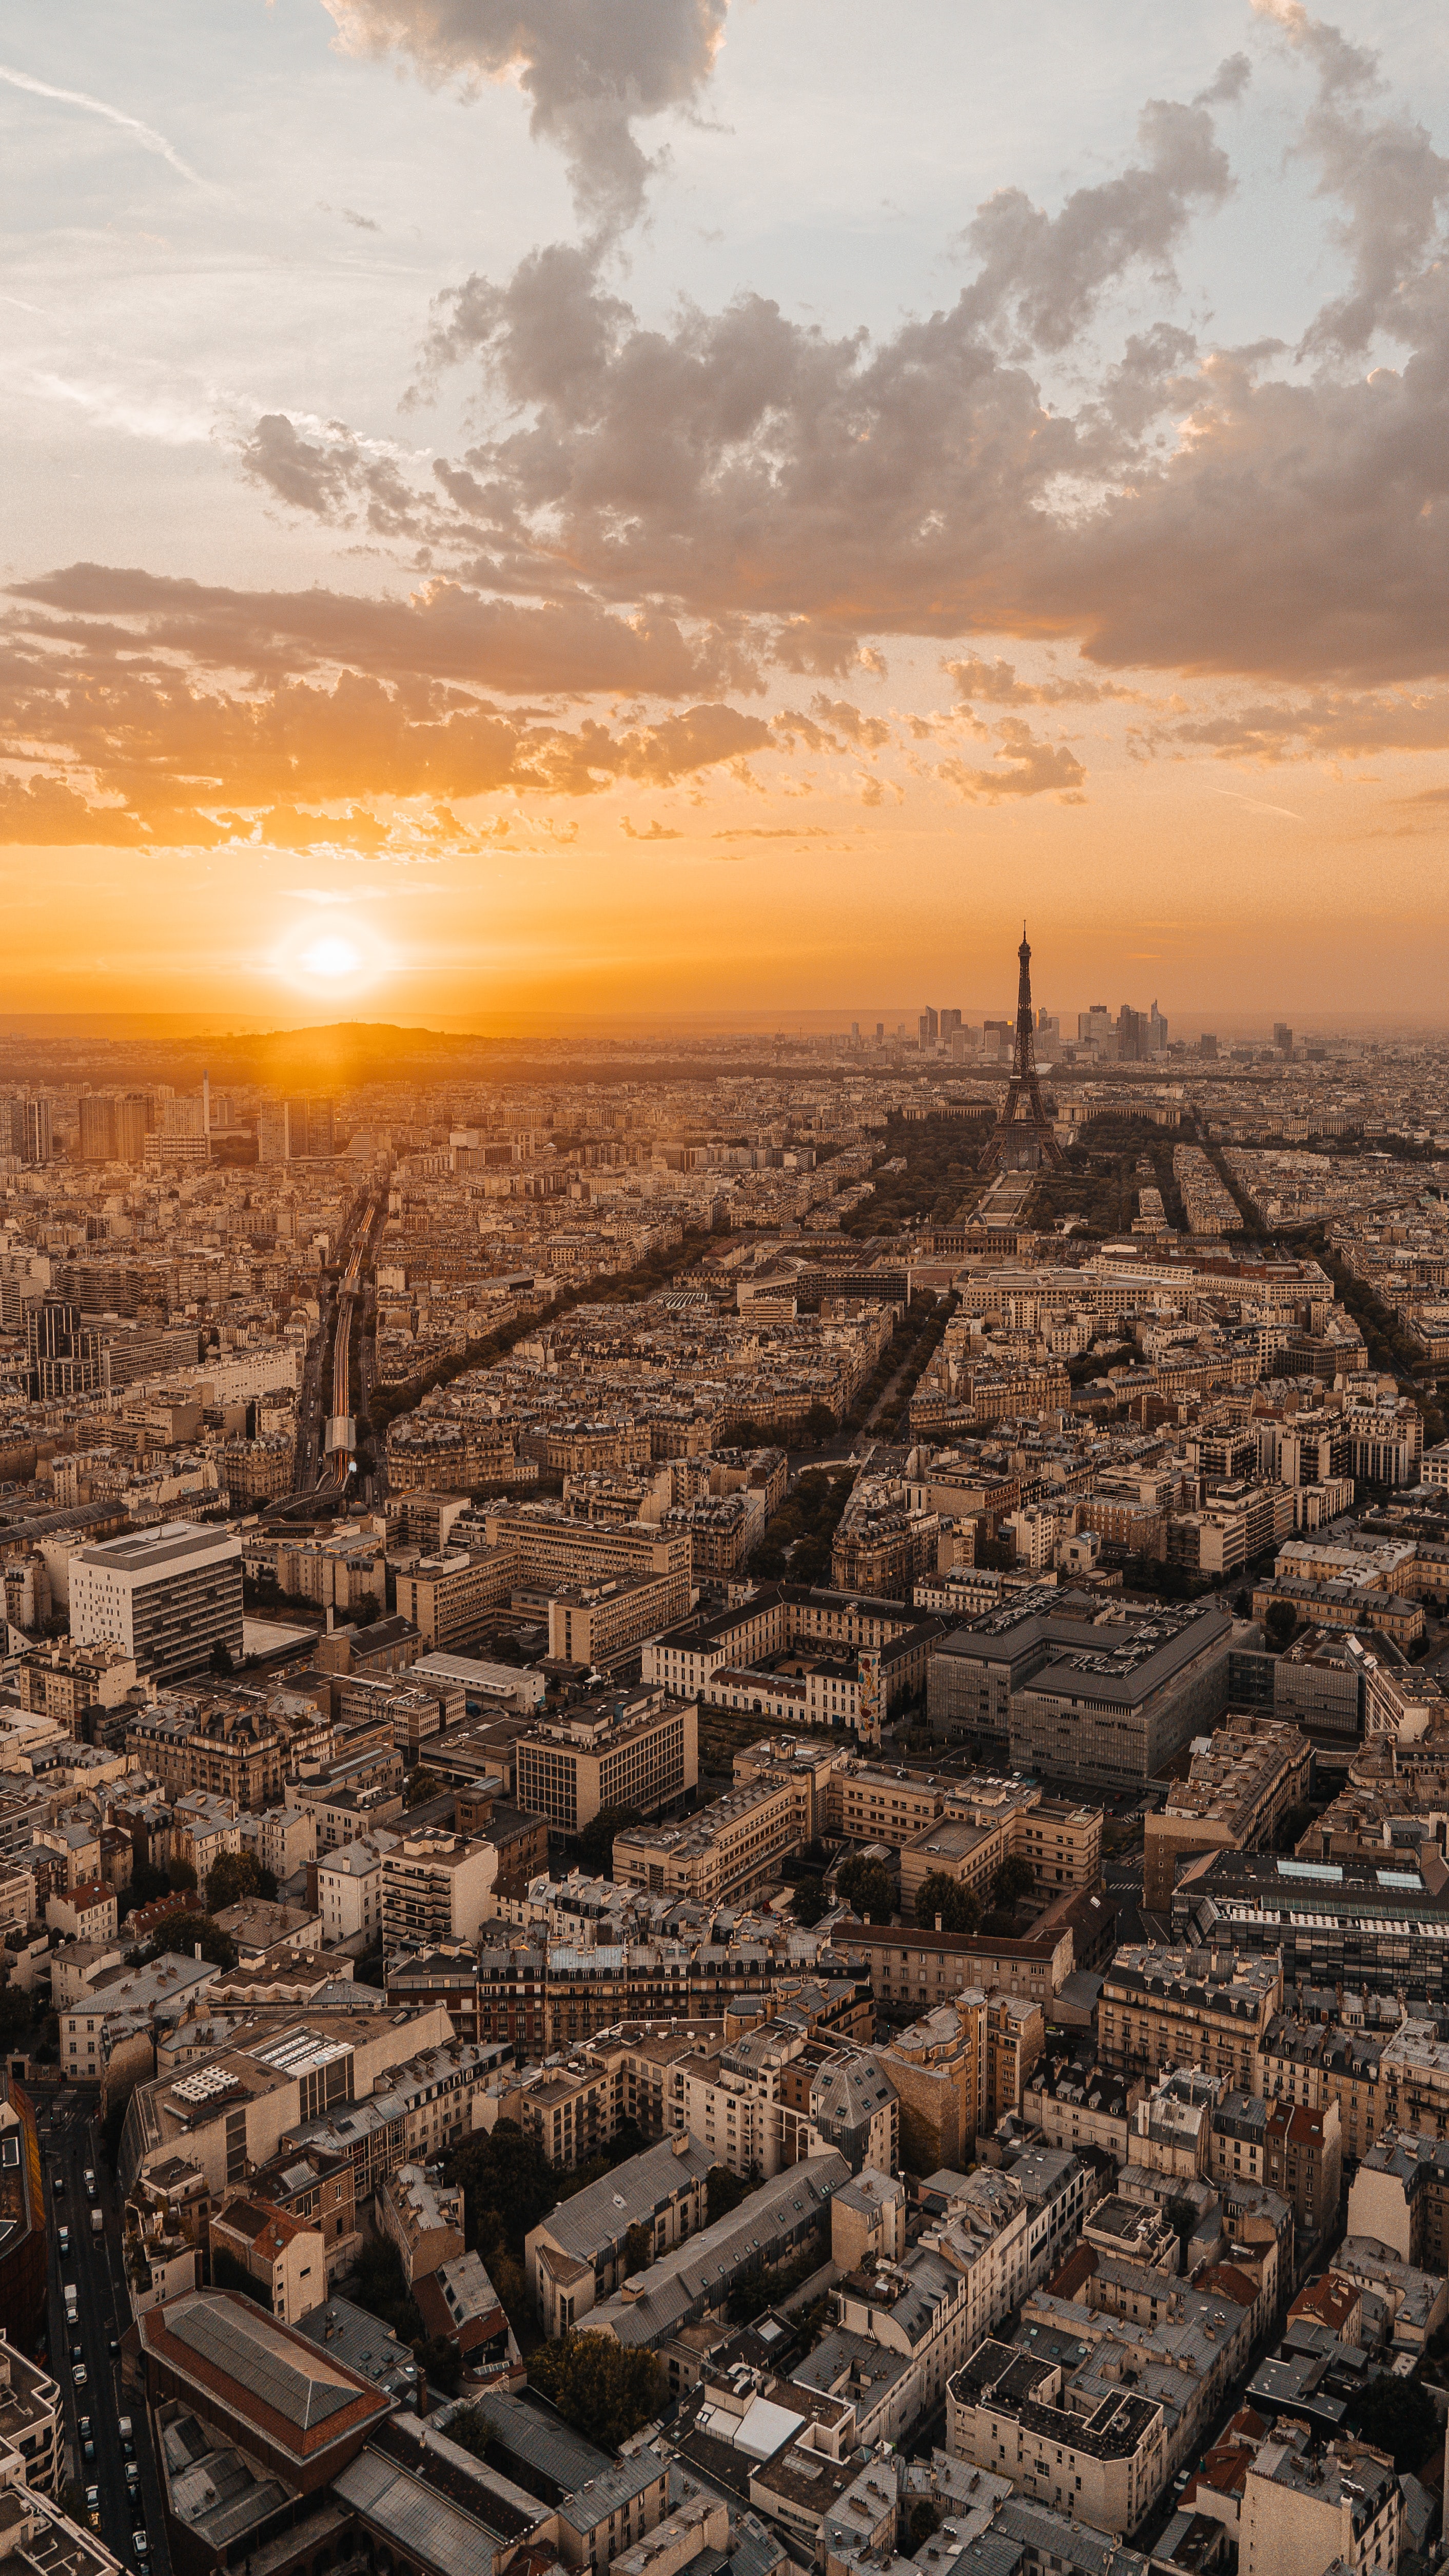 france, cities, sunset, city, building, roof, roofs UHD